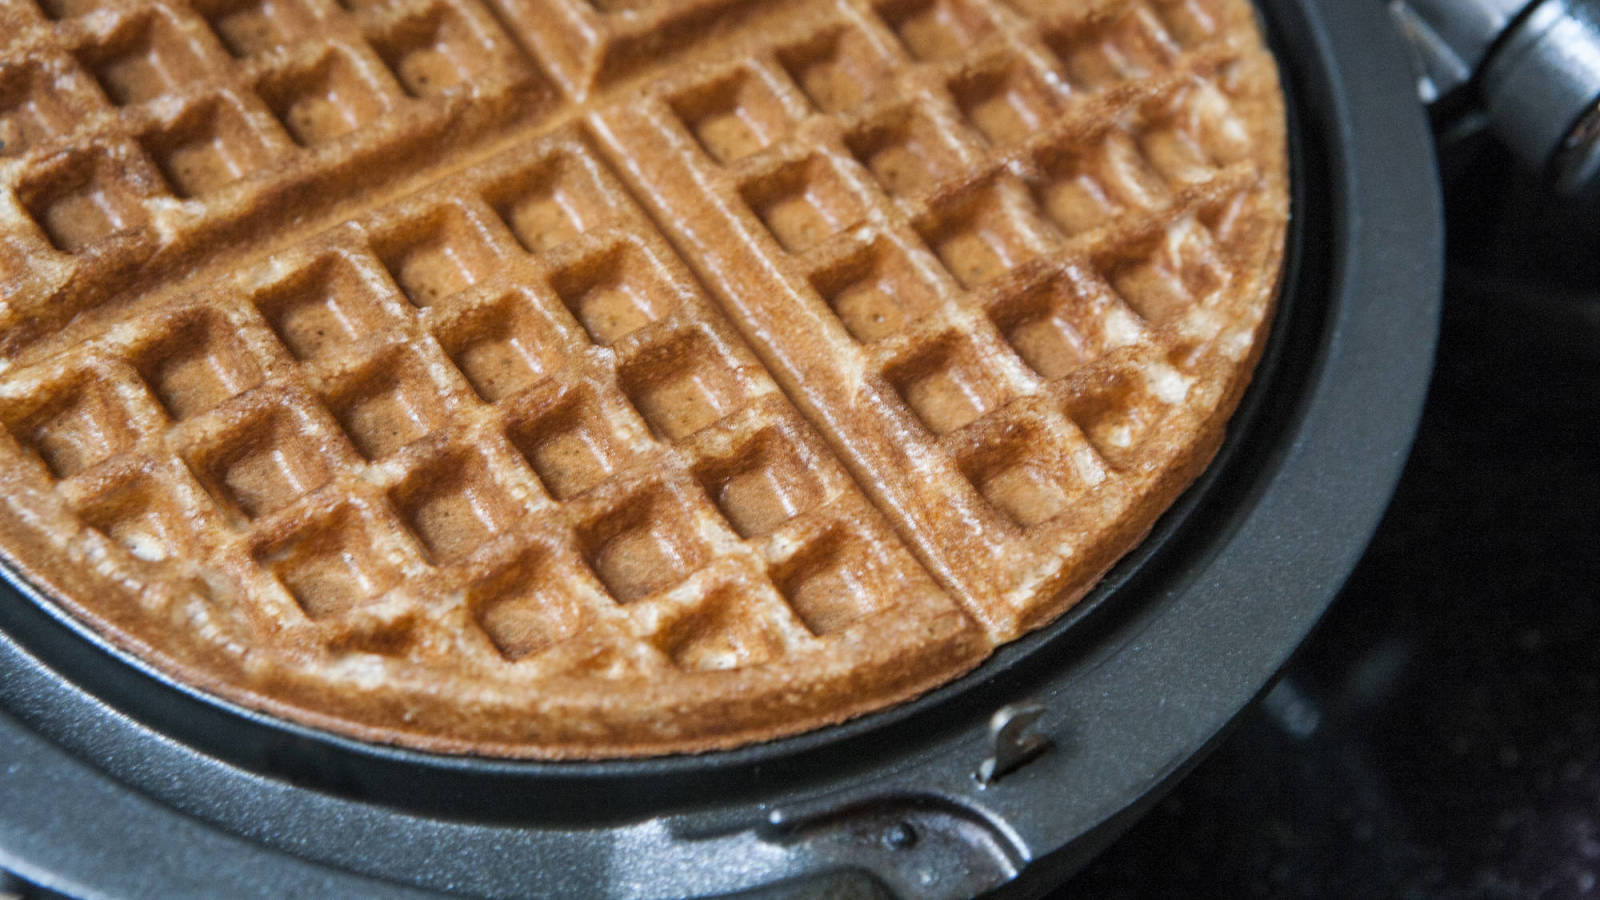 10 uses for a waffle iron besides making waffles - TrendRadars